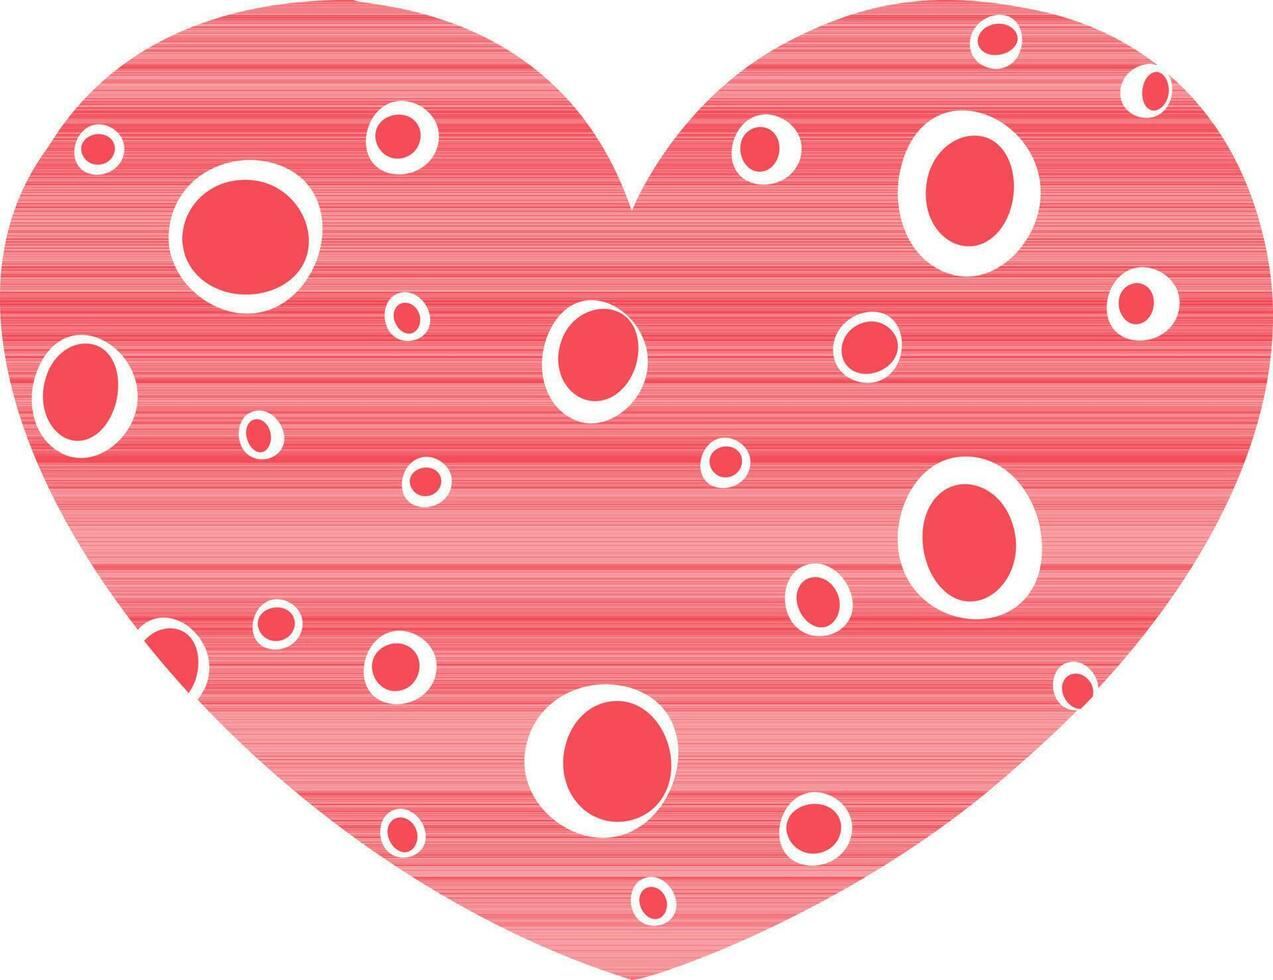 Flat style pink heart with white circles. vector